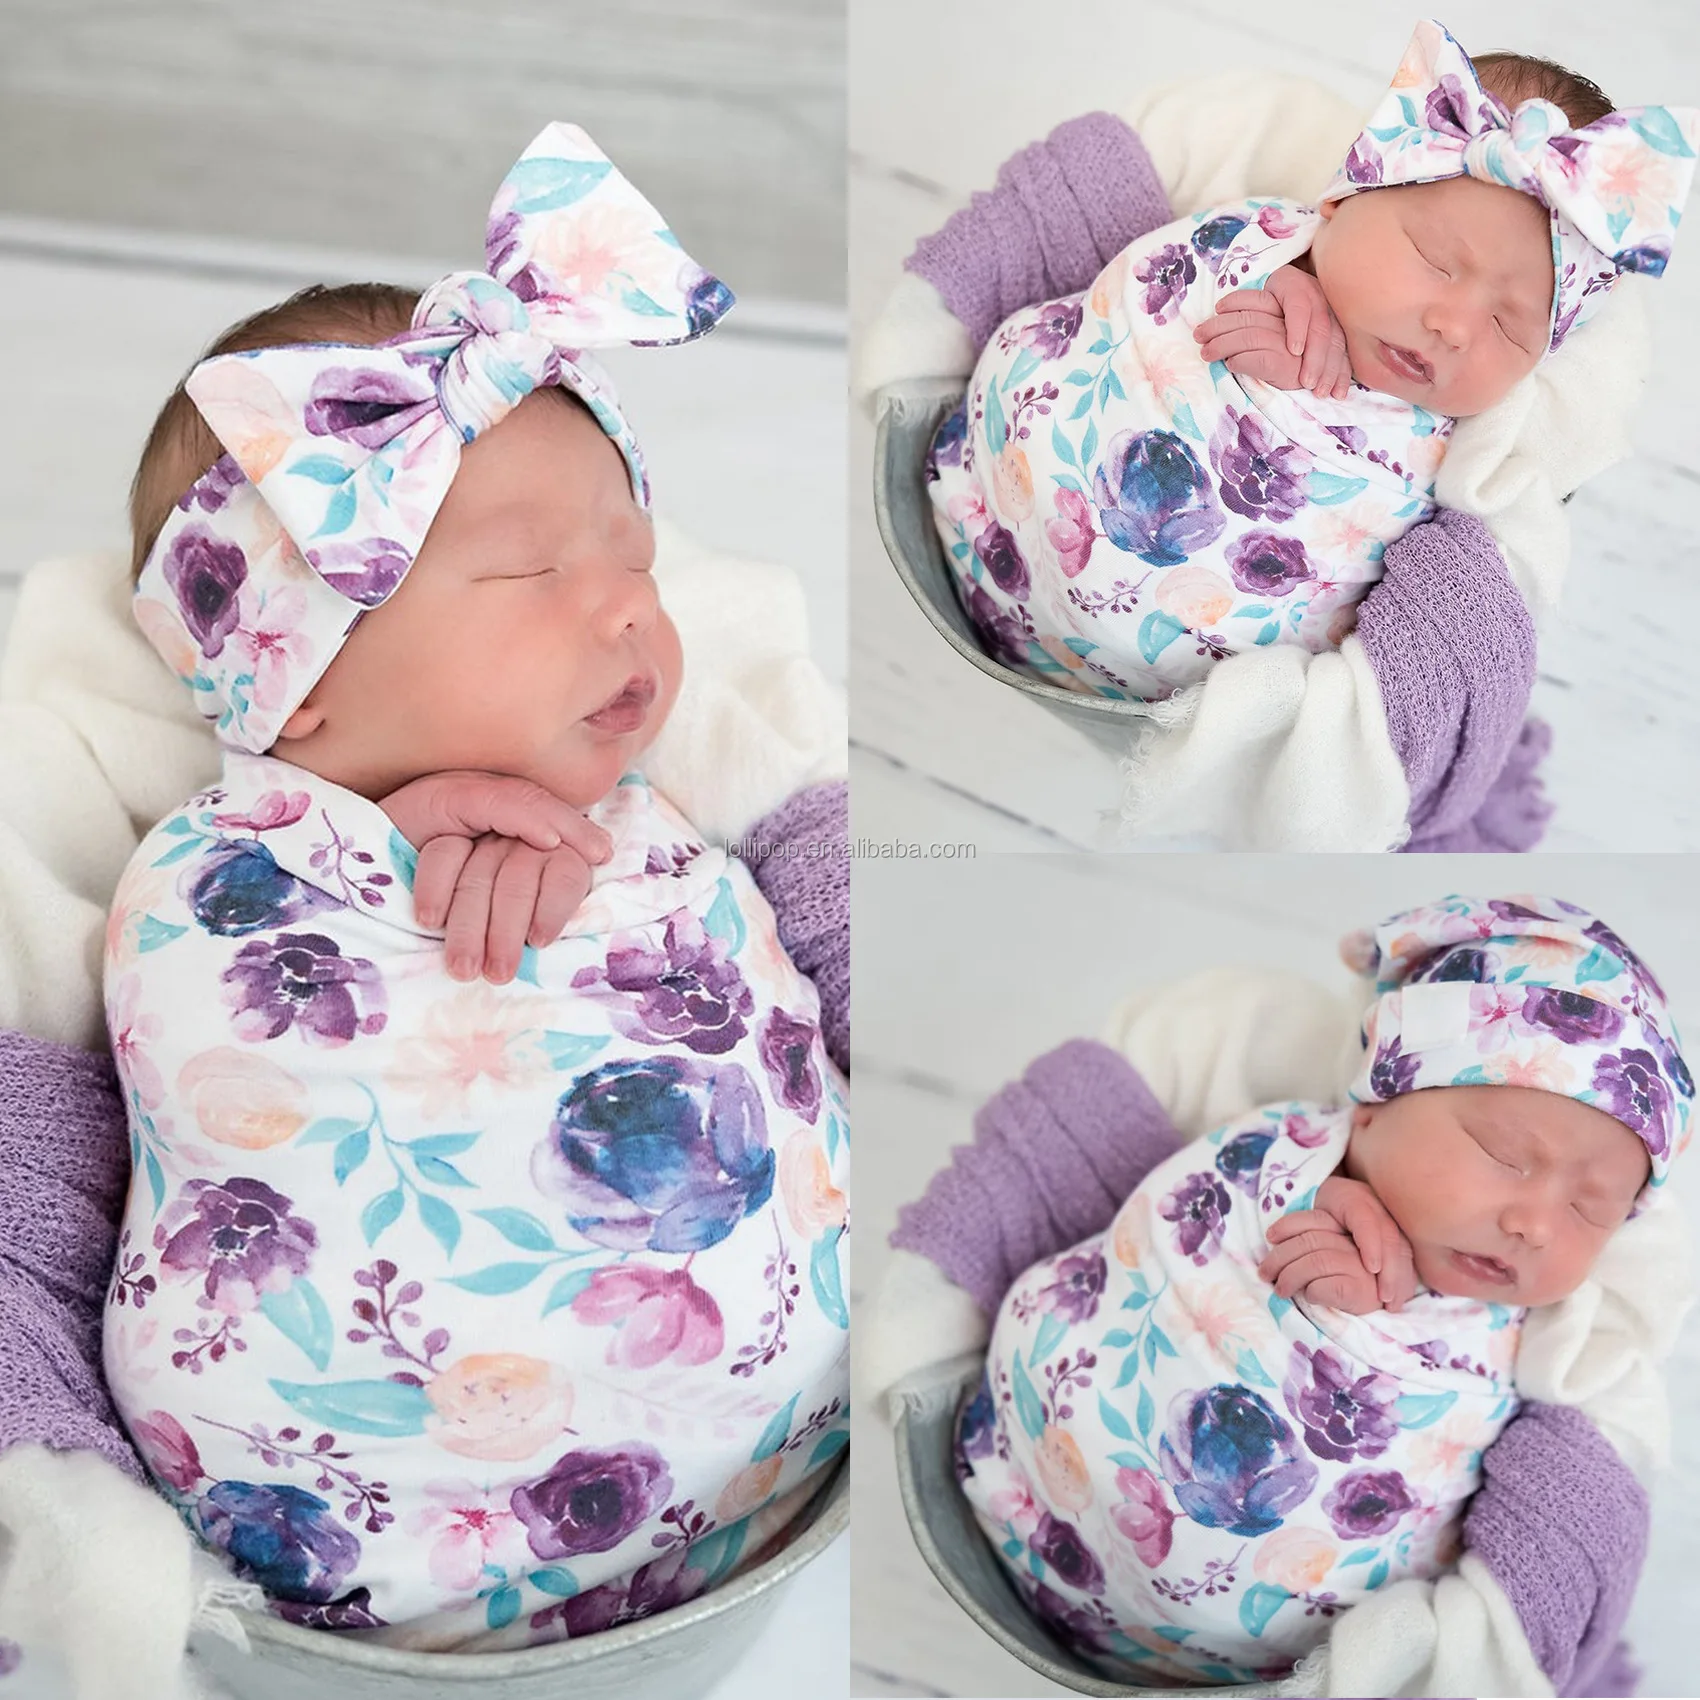 Flower Print Baby Swaddle Cocoon Pack B Sleep Receiving Blankets Cotton Nursery Swaddle and Hair Band Set 3 Pack for Photograph Newborn Receiving Blanket Headband Set